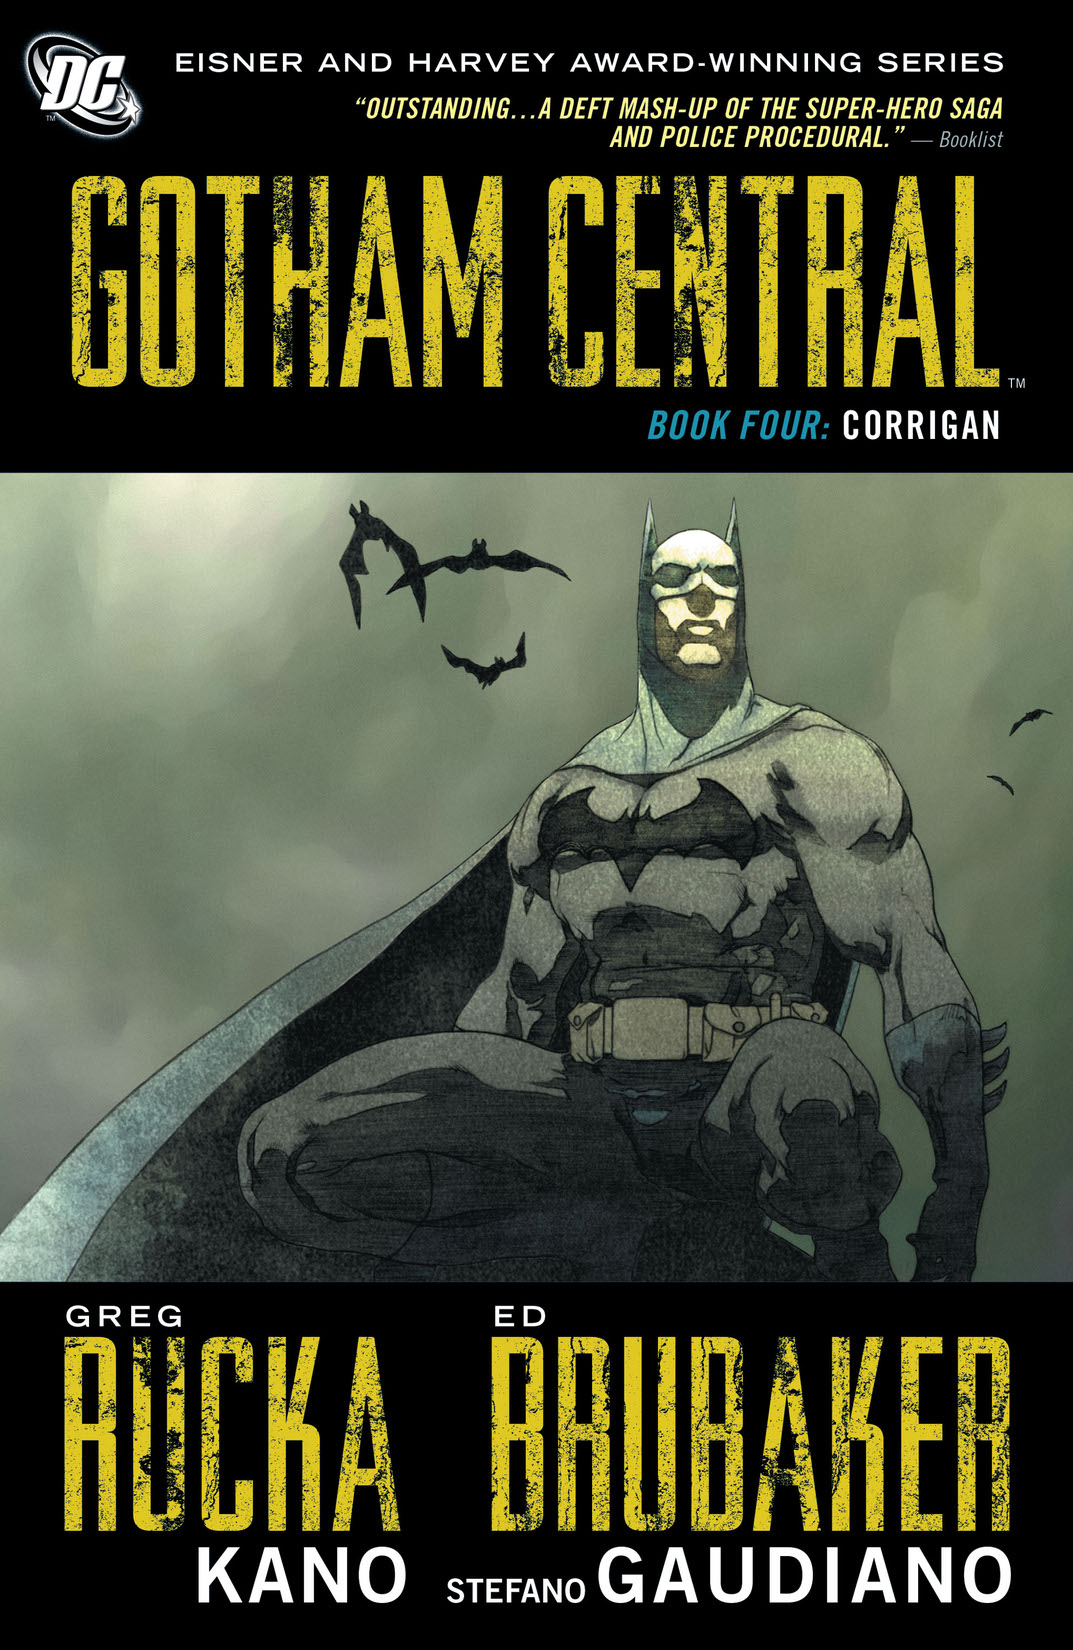 Gotham Central Book 4: Corrigan preview images